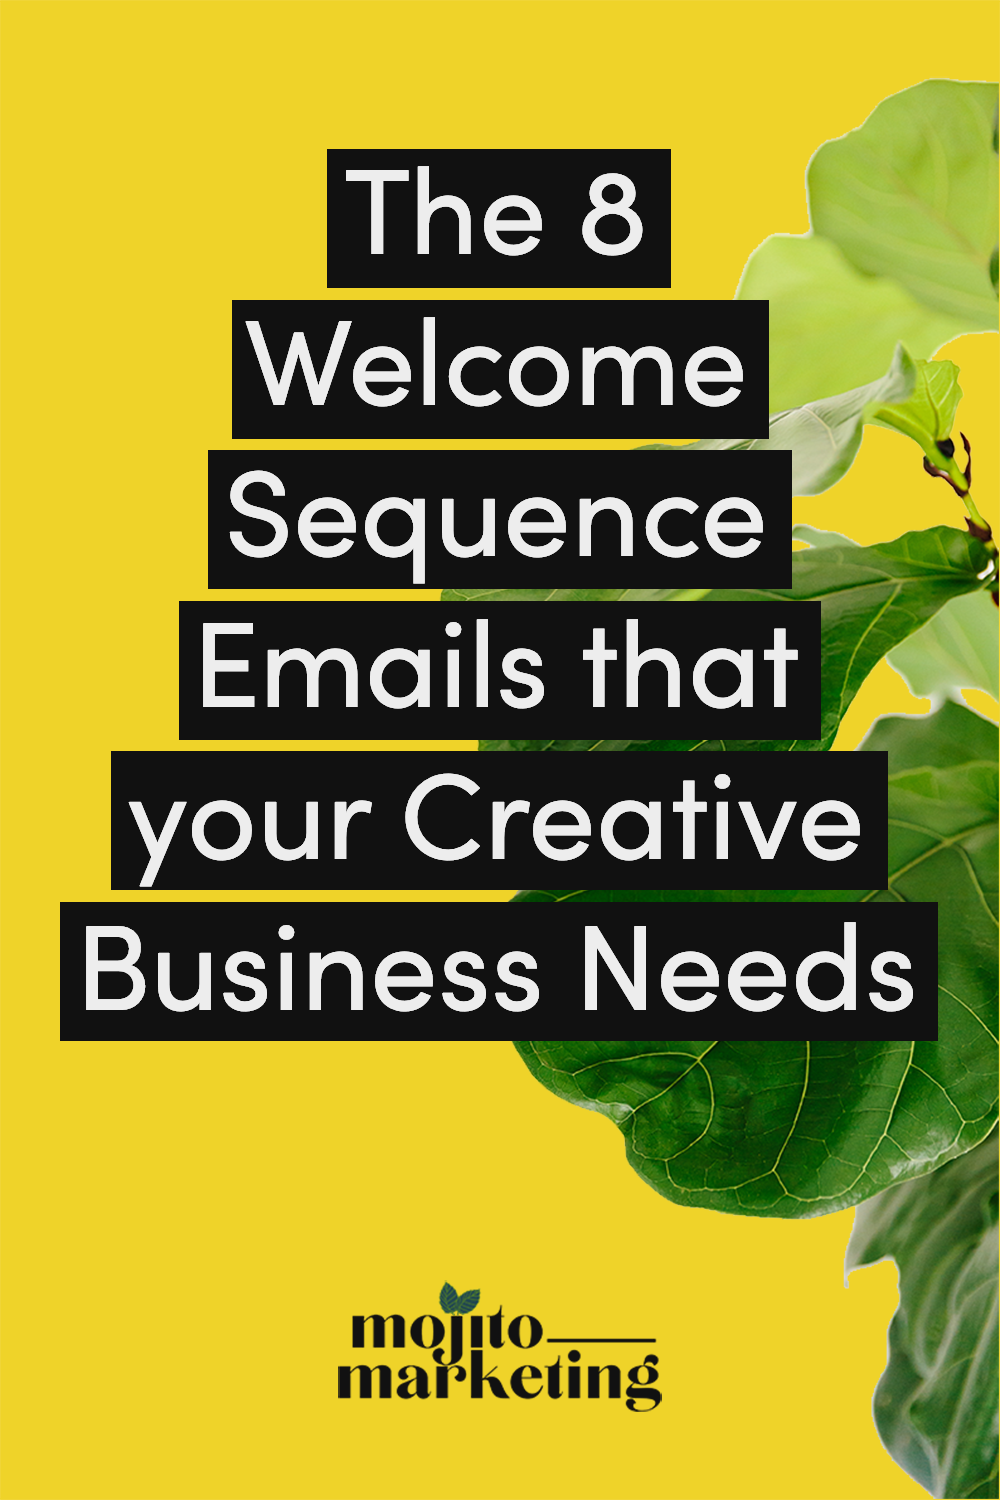 The_8_Welcome_Sequence_Emails_that_your_Creative_Business_Needs_B.png